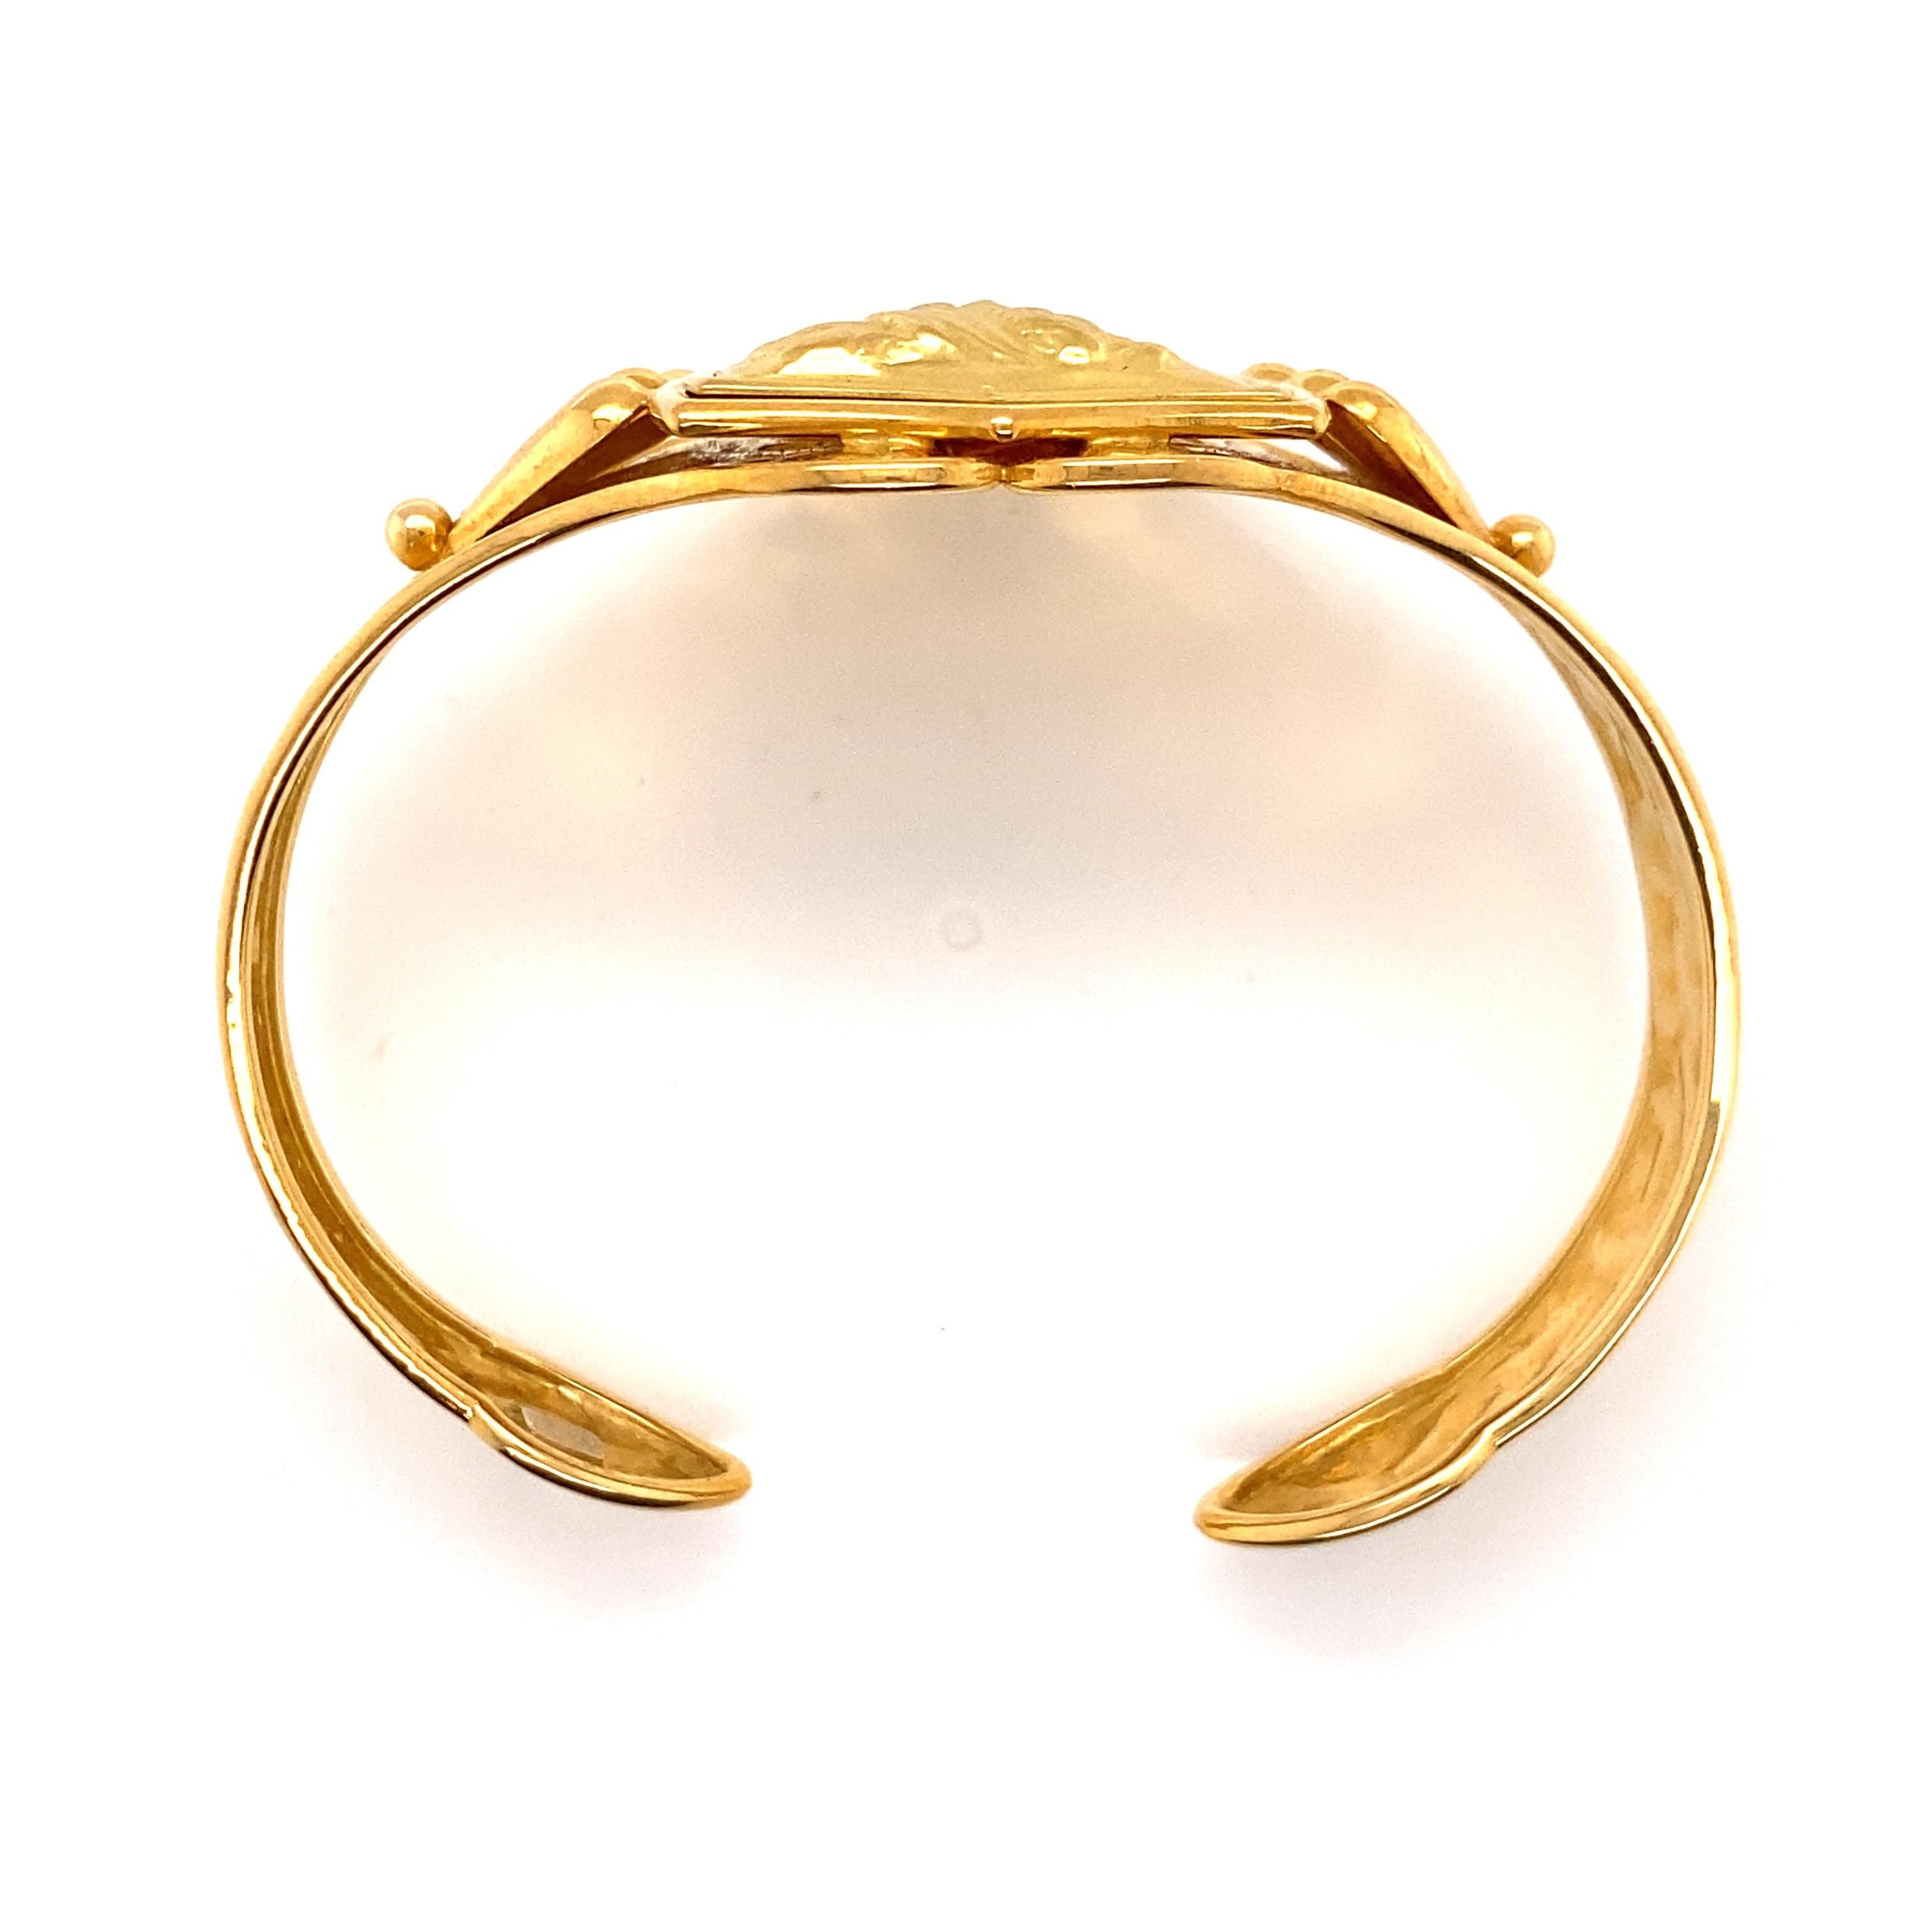 Vintage 18K Yellow Gold Cuff Bracelet with Woman Figure on a Shield 2